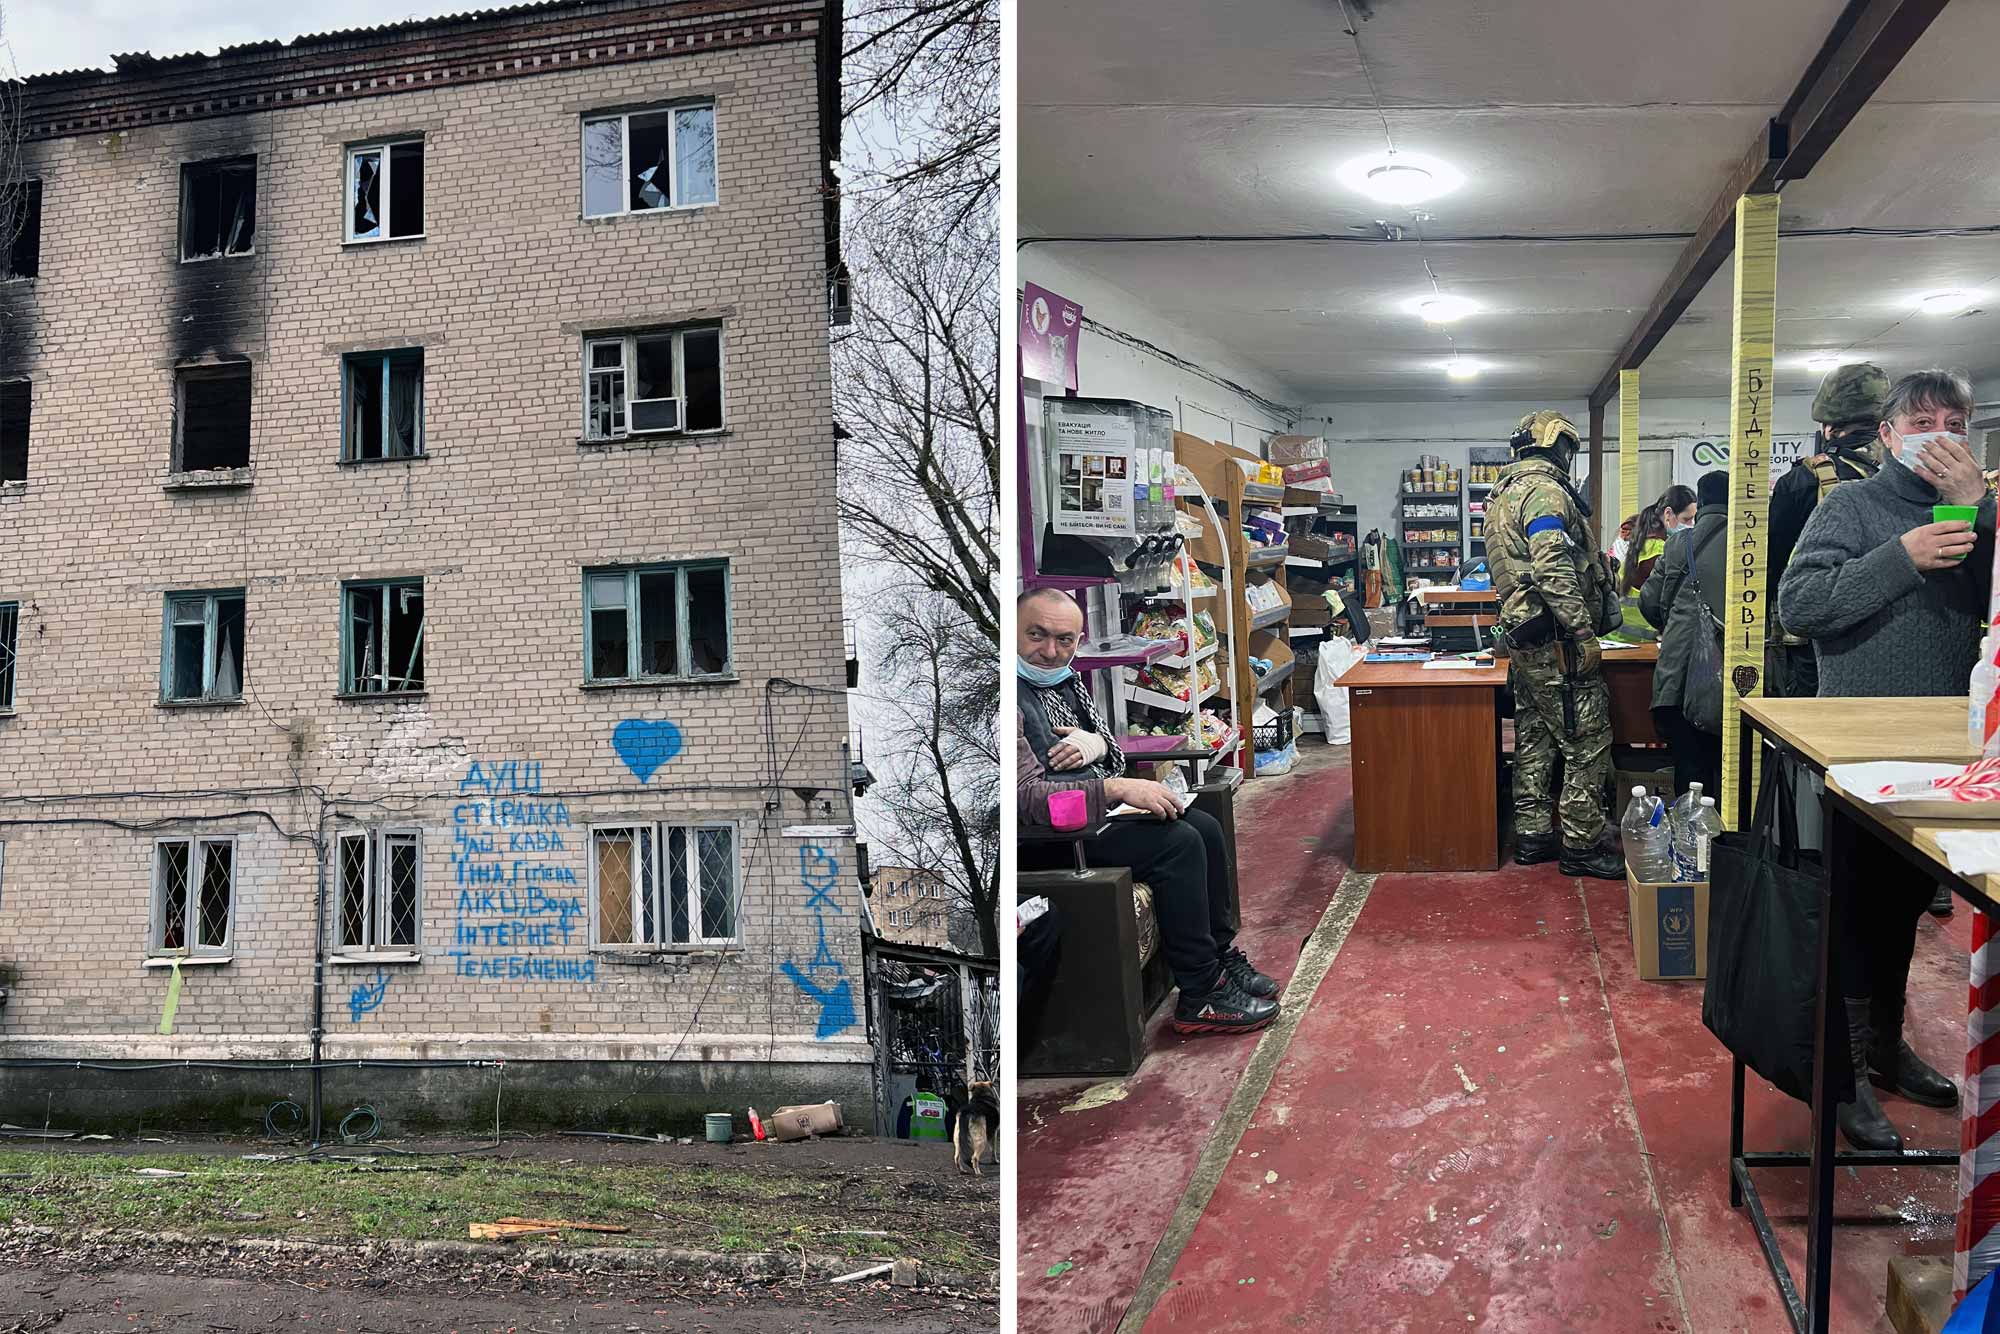 (L) Entrance to the volunteer hub, marked with blue paint, in basement of a residential block. (R) The interior of the volunteer hub in Avdiivka where people can get food, take showers or wash their clothes. © O. Golovina